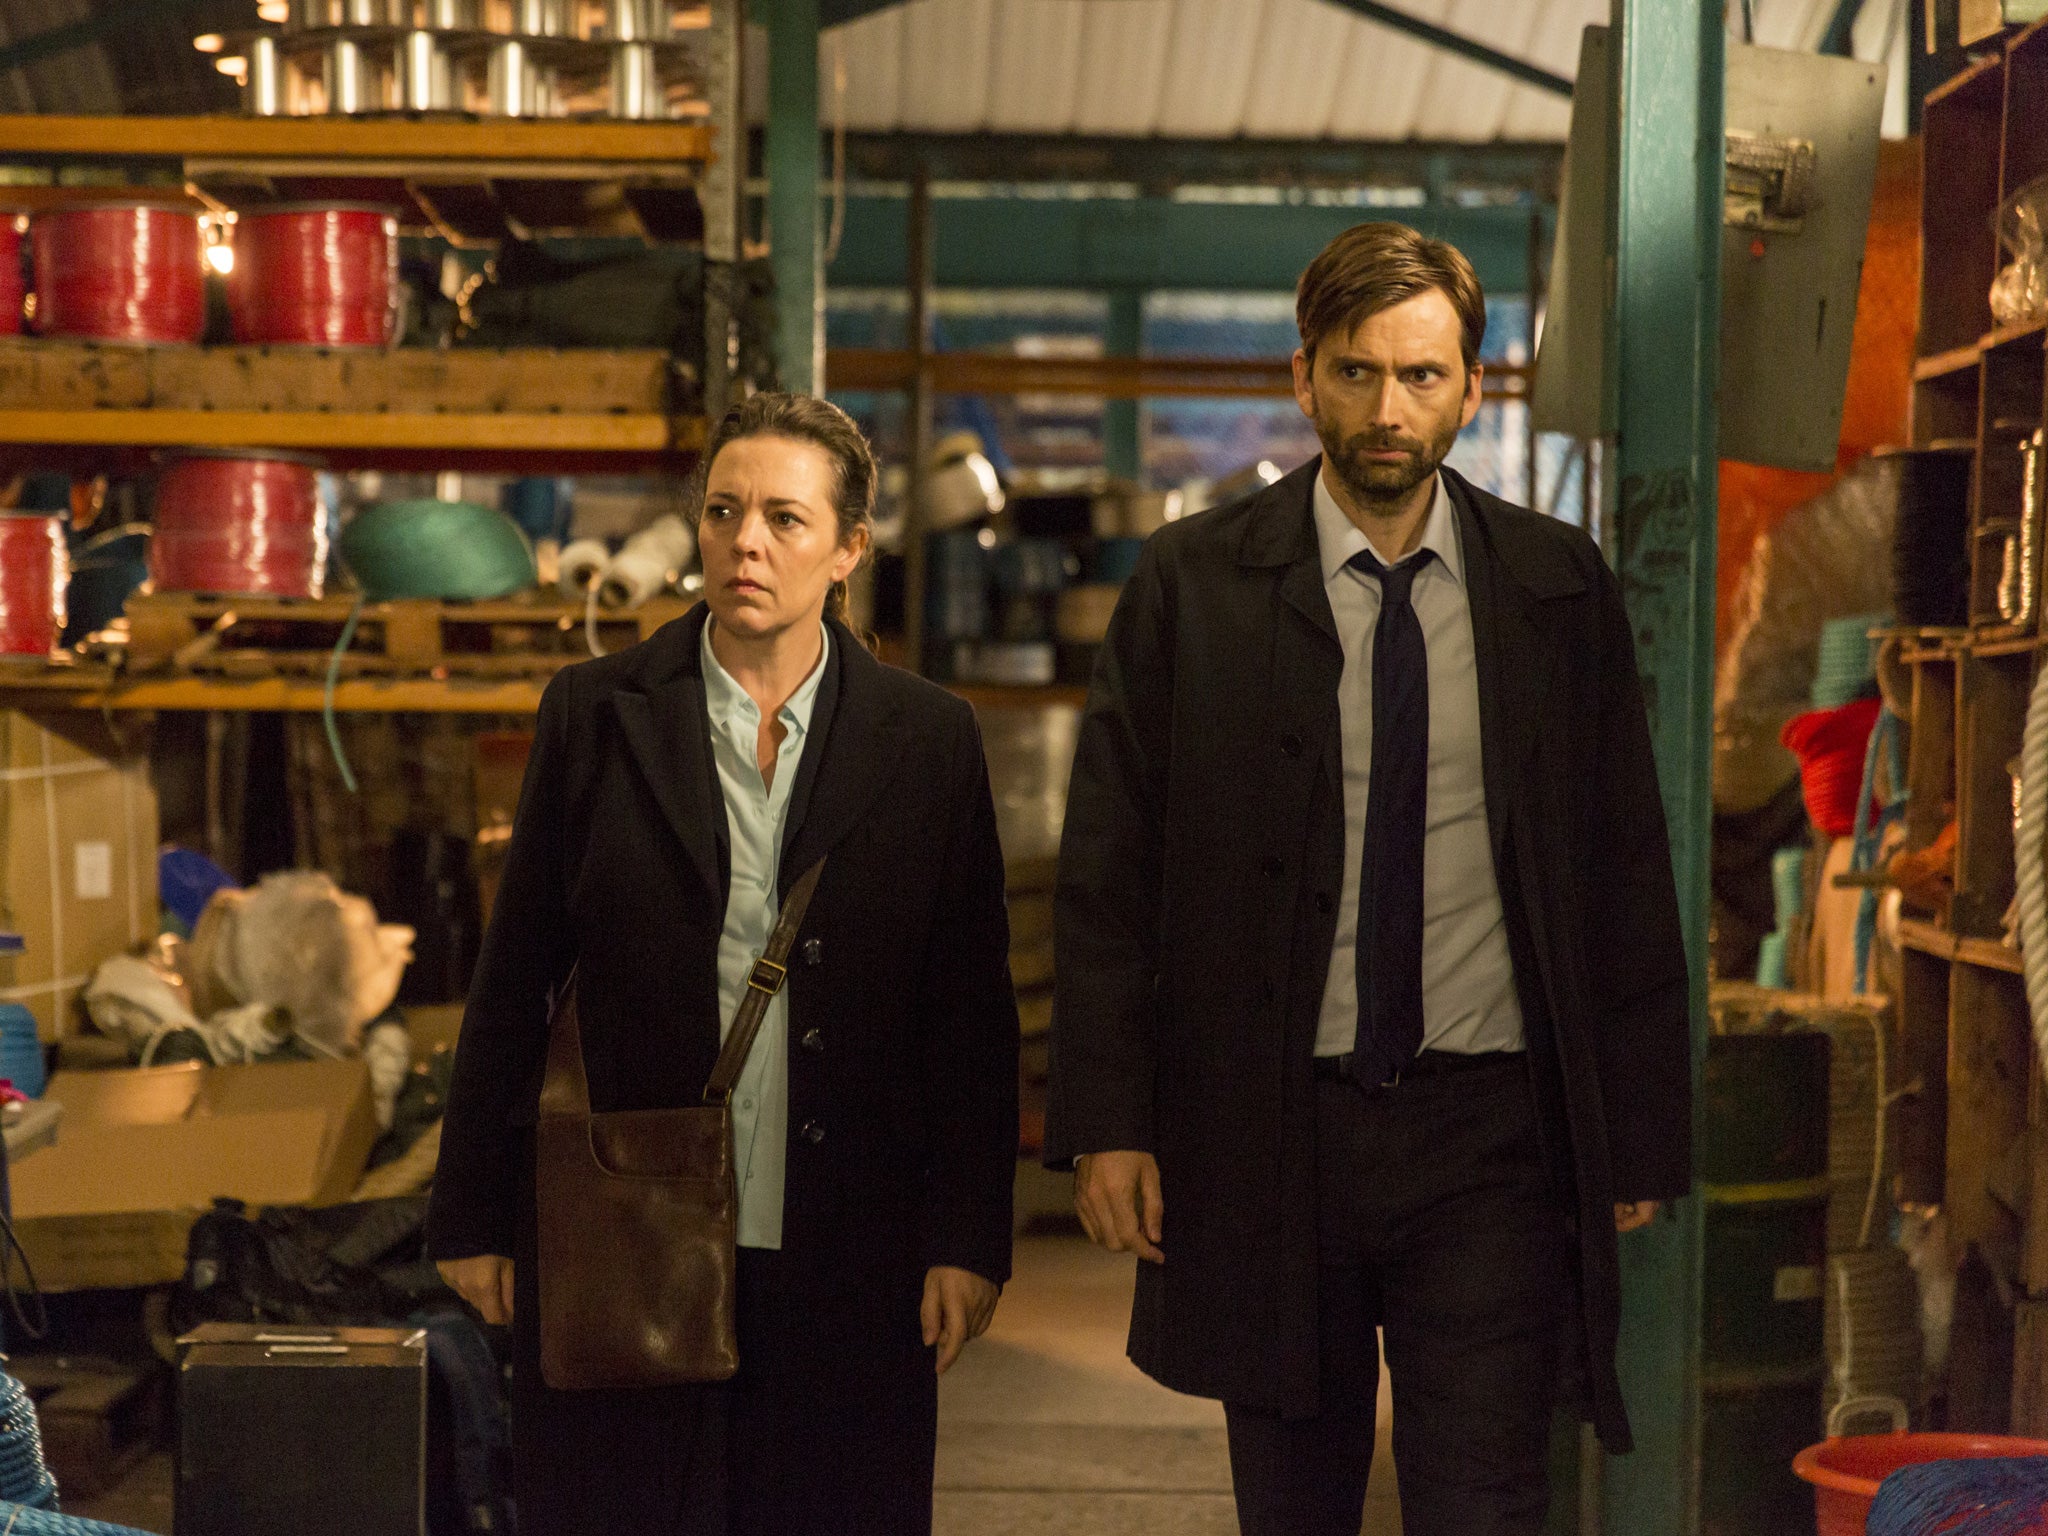 DS Miller (Olivia Colman) and DI Hardy (David Tennant) were attempting to close in on the attacker